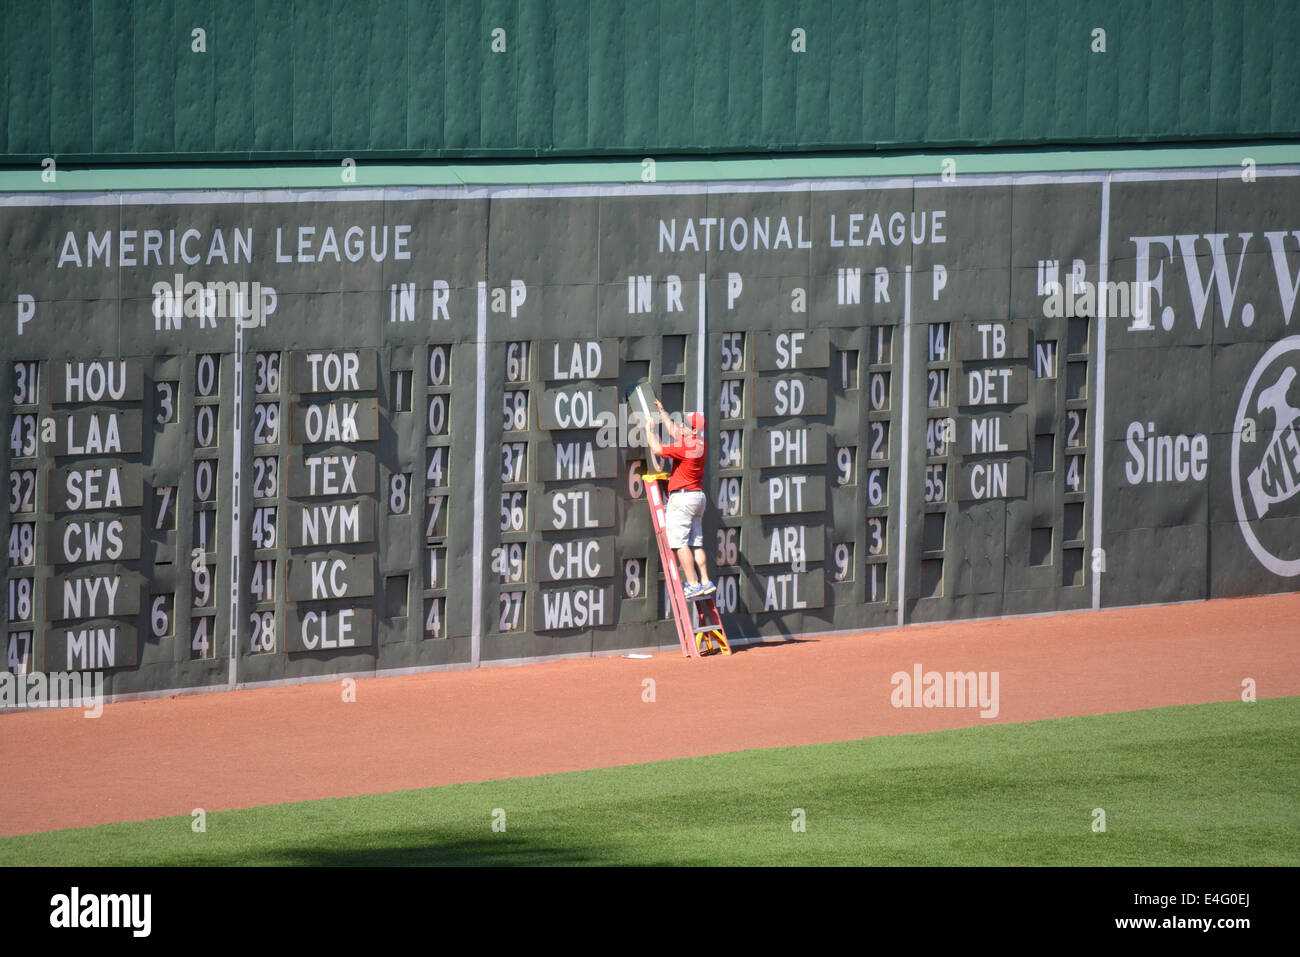 Changing the manual scoreboard on the Green Monster at Fenway Park in Boston. Stock Photo